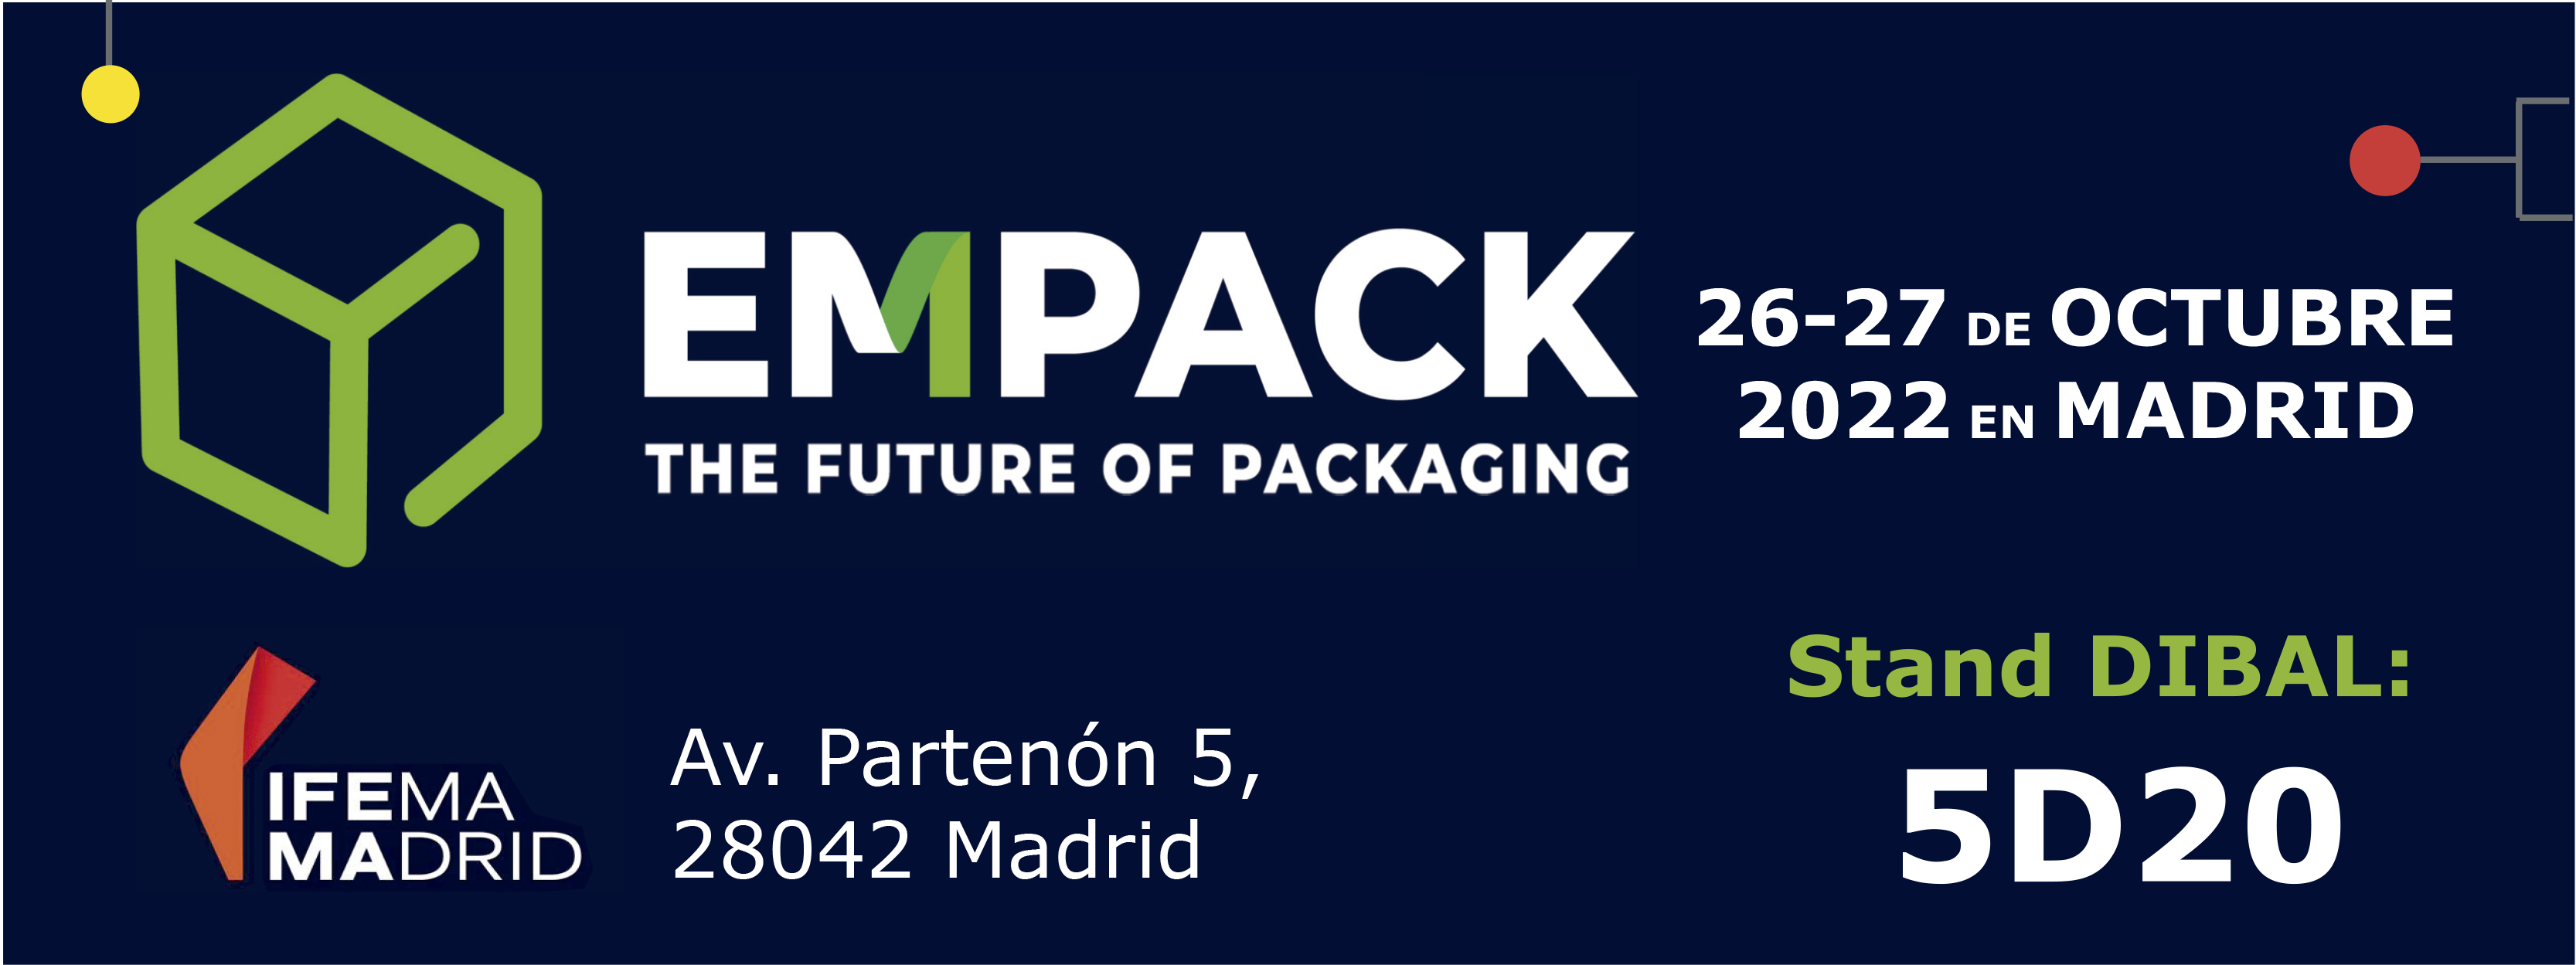 See you at the Empack Madrid with important news!